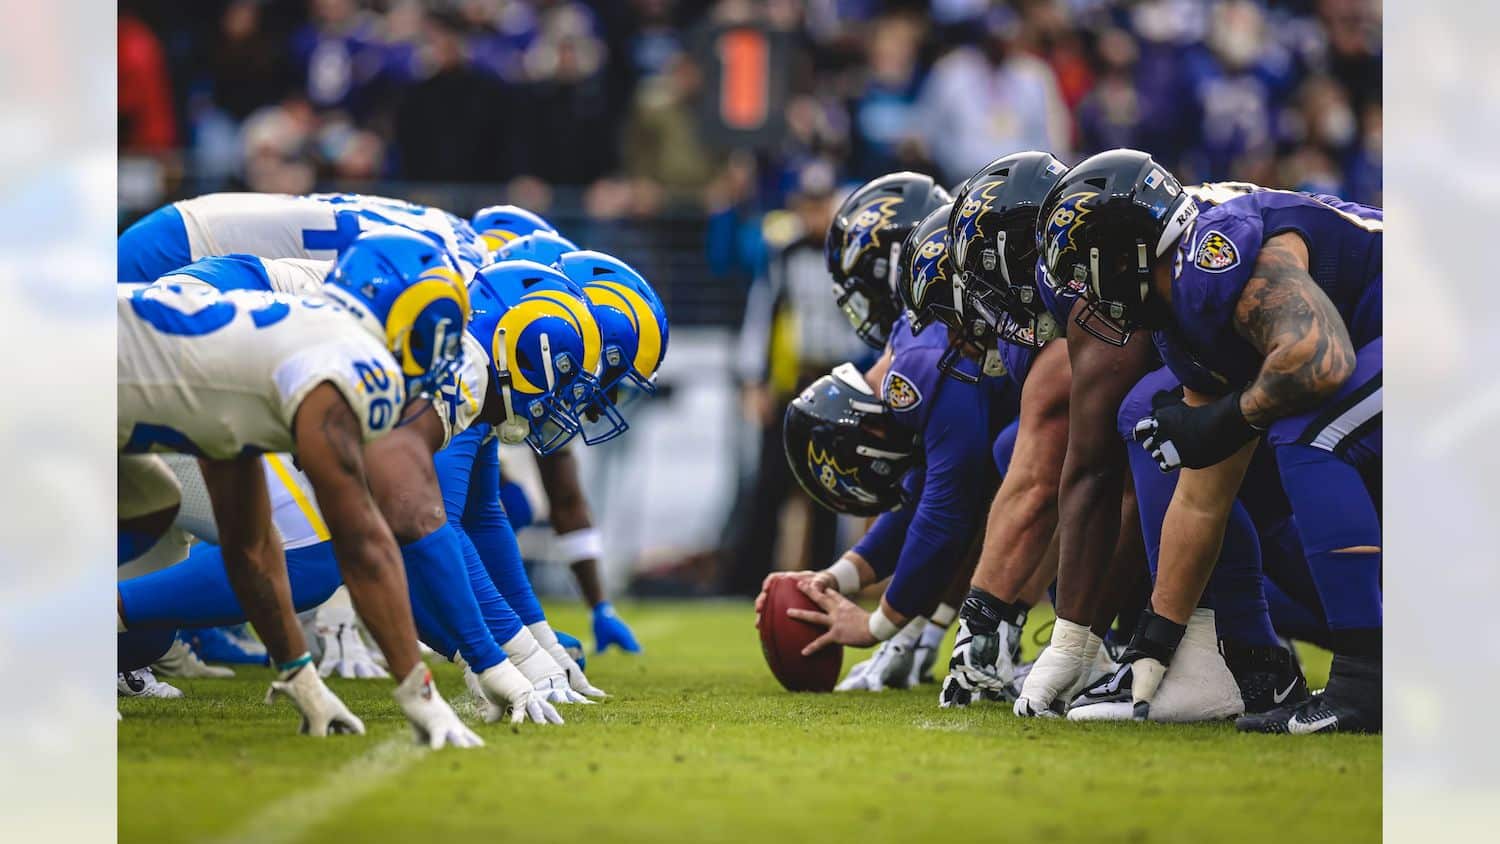 The Los Angeles Rams Take On The Baltimore Ravens. Photo Credit: Brevin Townsell | LA Rams